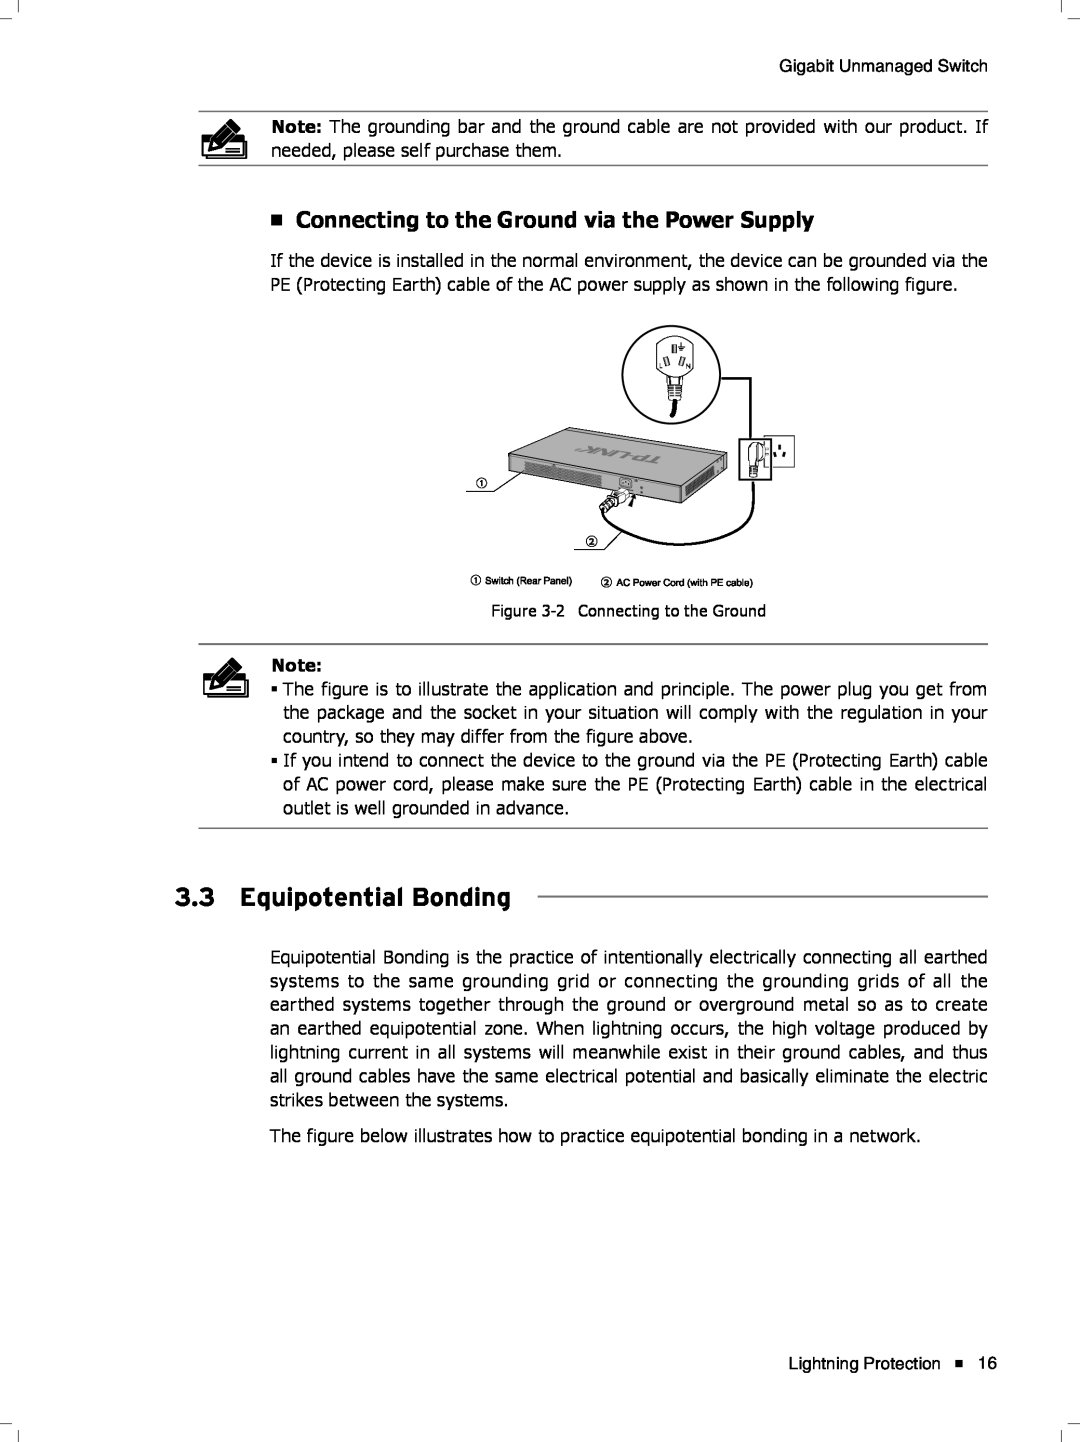 TP-Link tl-sg1048 manual Equipotential Bonding, Connecting to the Ground via the Power Supply 